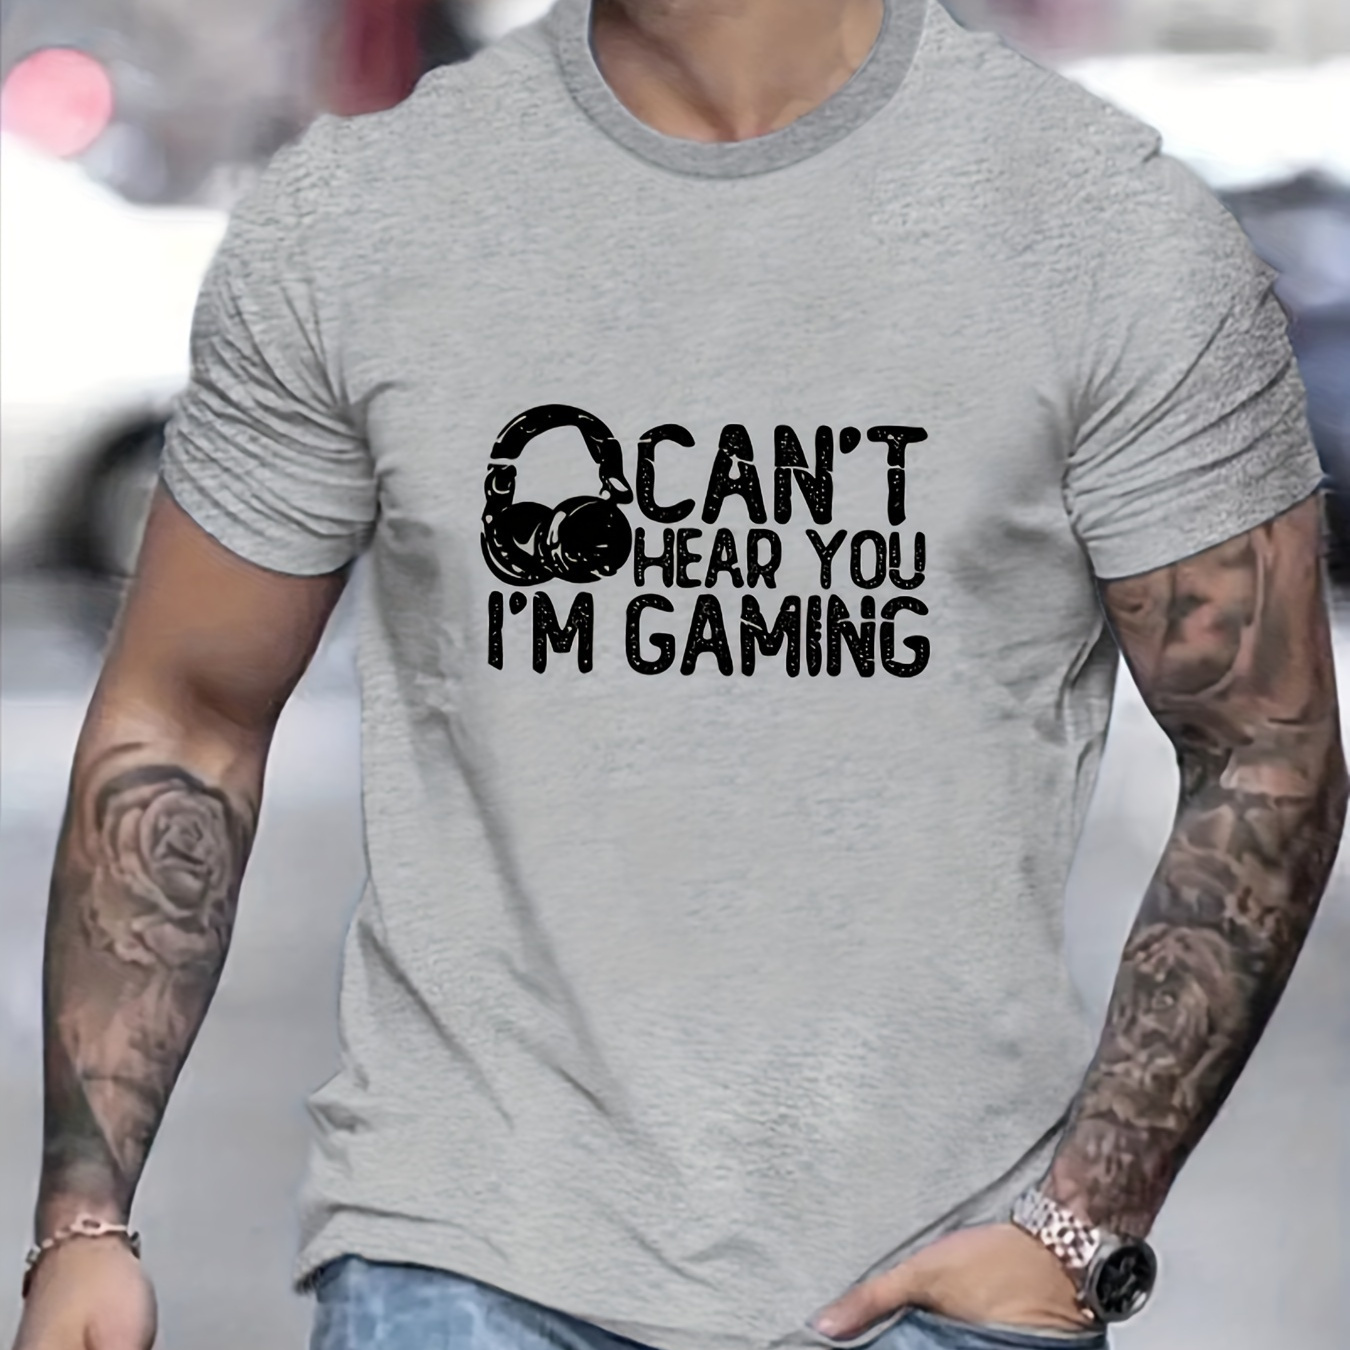 

Can't Hear You I'm Gaming And Anime Headphone Graphic Print, Men's Novel Graphic Design T-shirt, Casual Comfy Tees For Summer, Men's Clothing Tops For Daily Activities